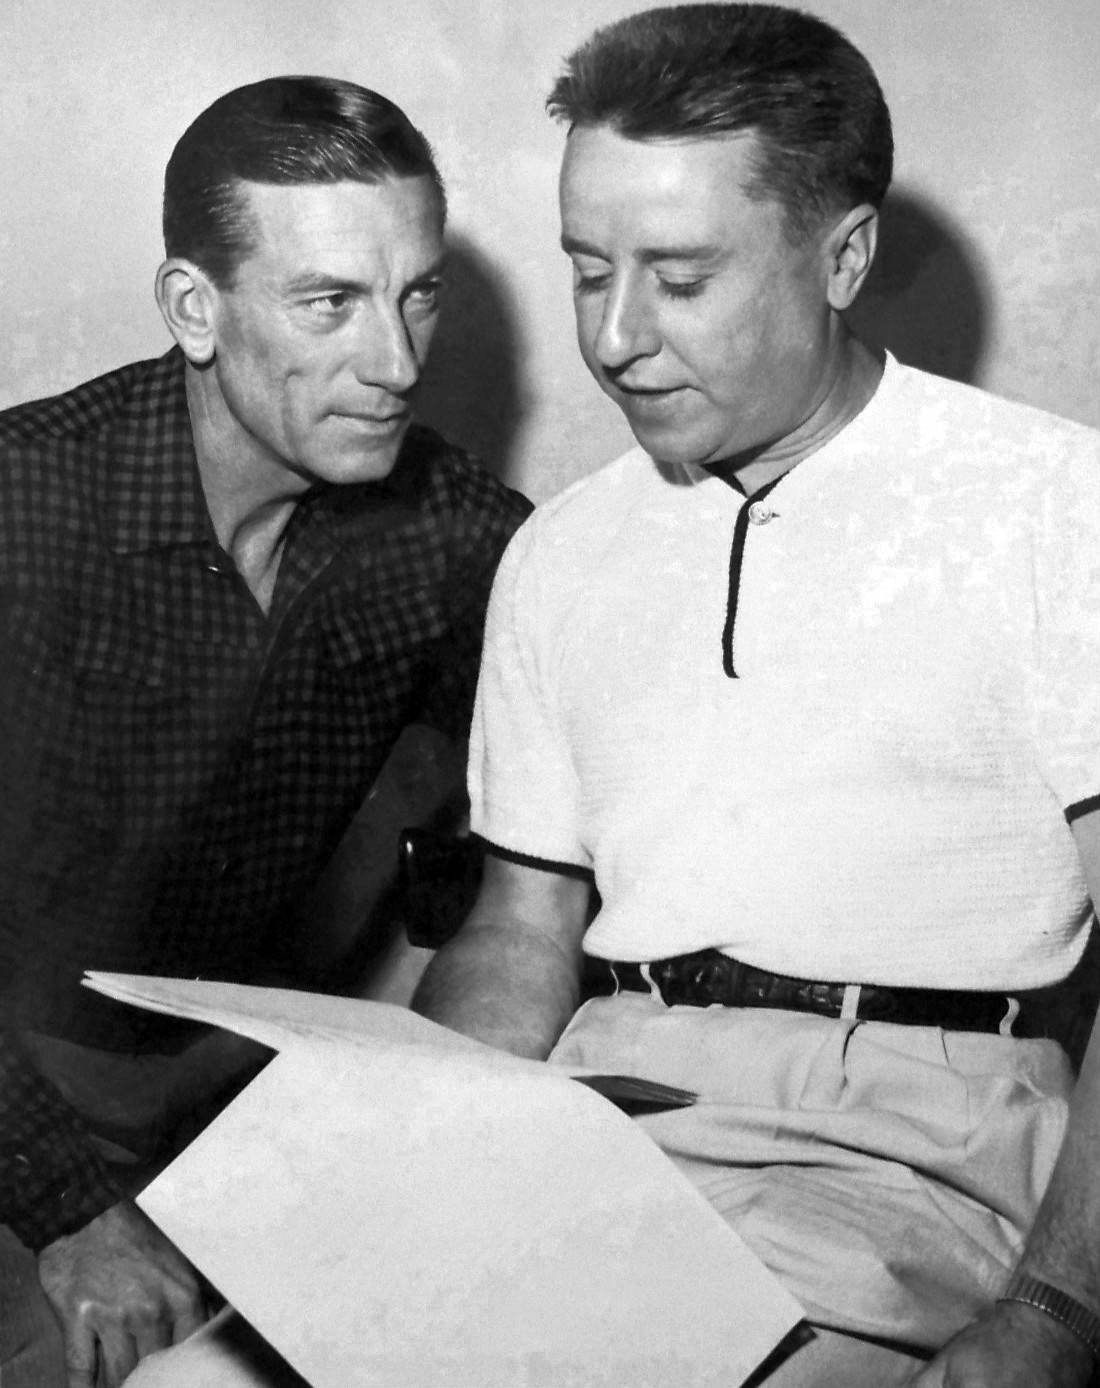 Hoagy Carmichael leers in a comical 'mad' manner at George Gobel, who sits quietly looking at a script